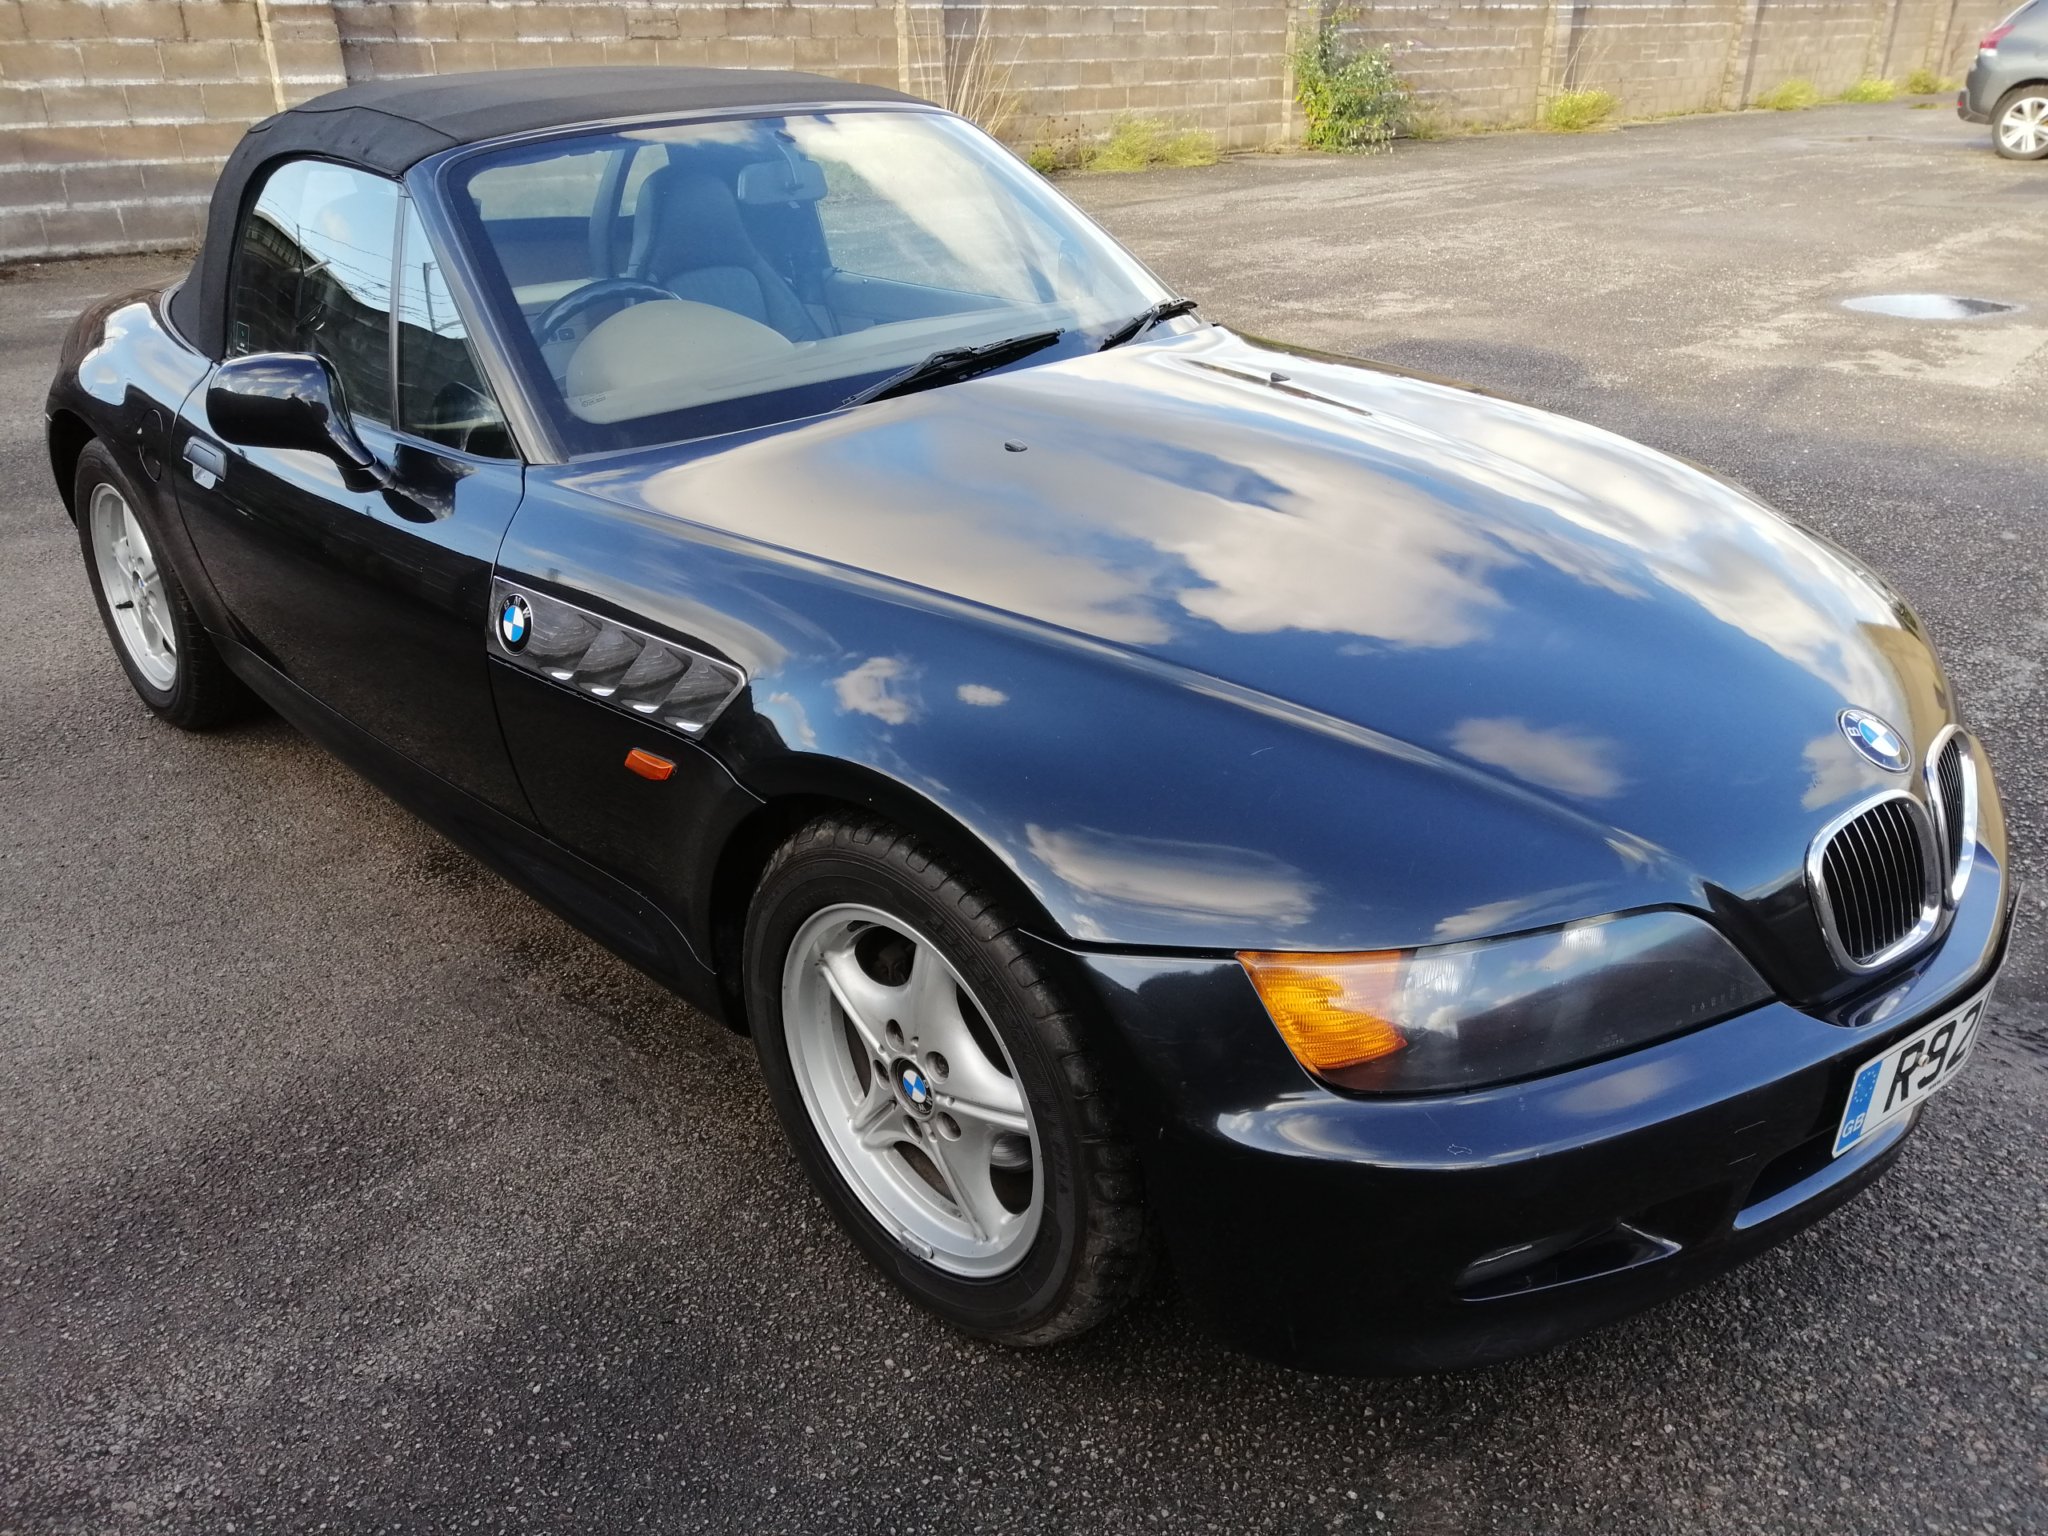 1998 BMW Z3 Available For Auction 41683494, 45% OFF